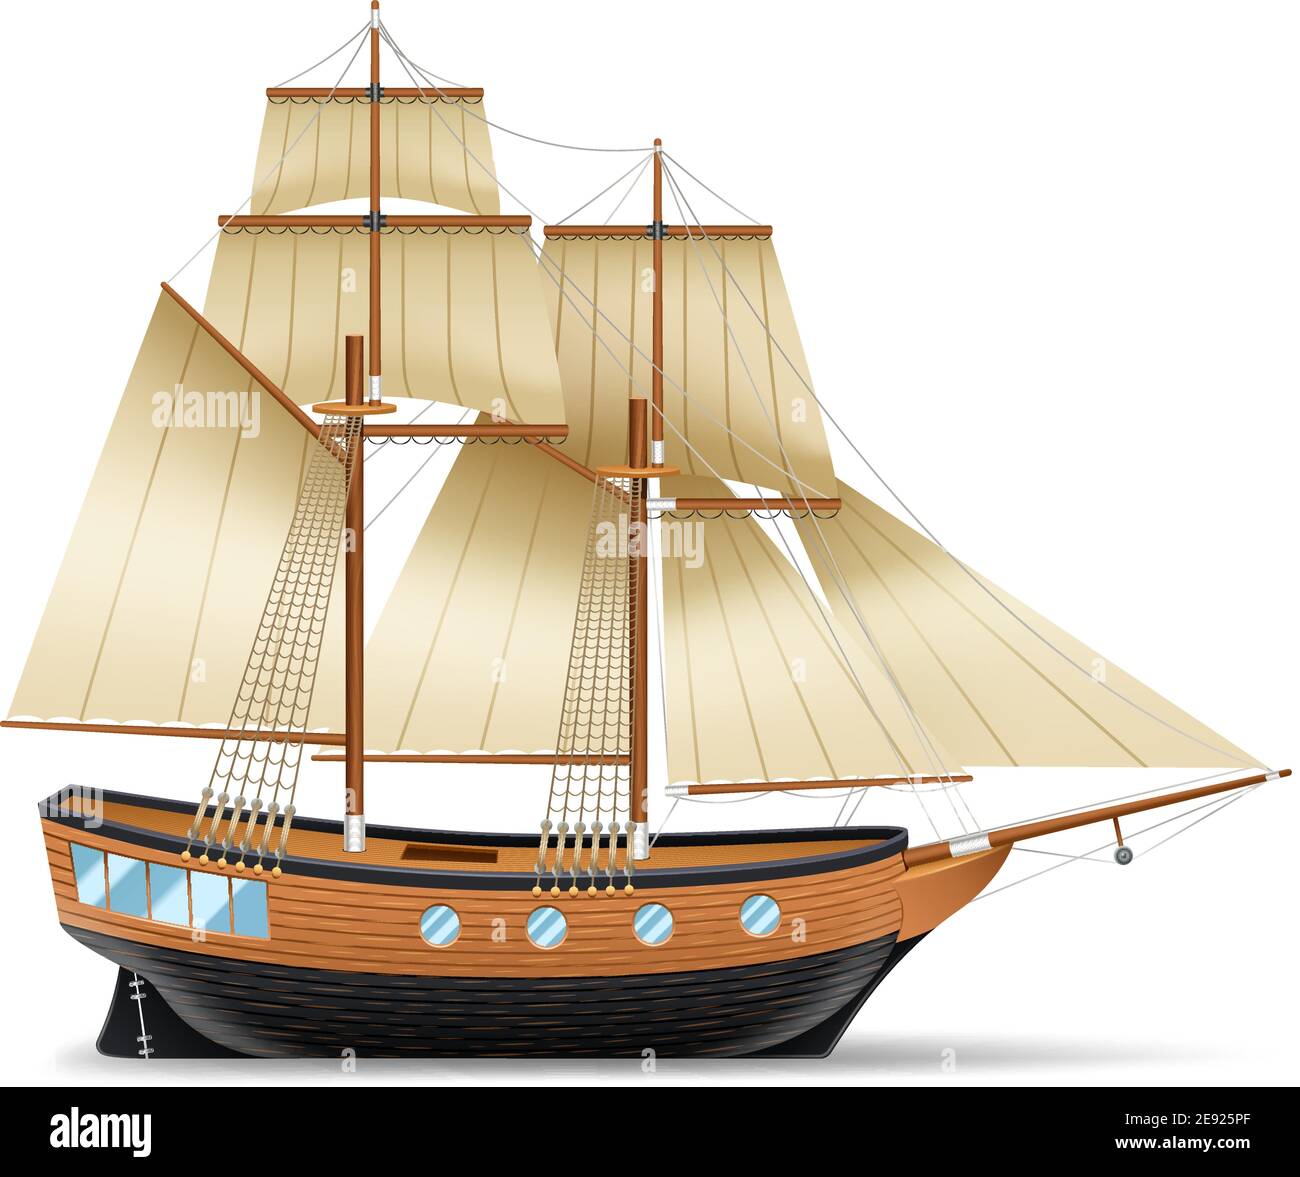 Wooden sailing ship with two masts square and gaff sails realistic vector illustration Stock Vector